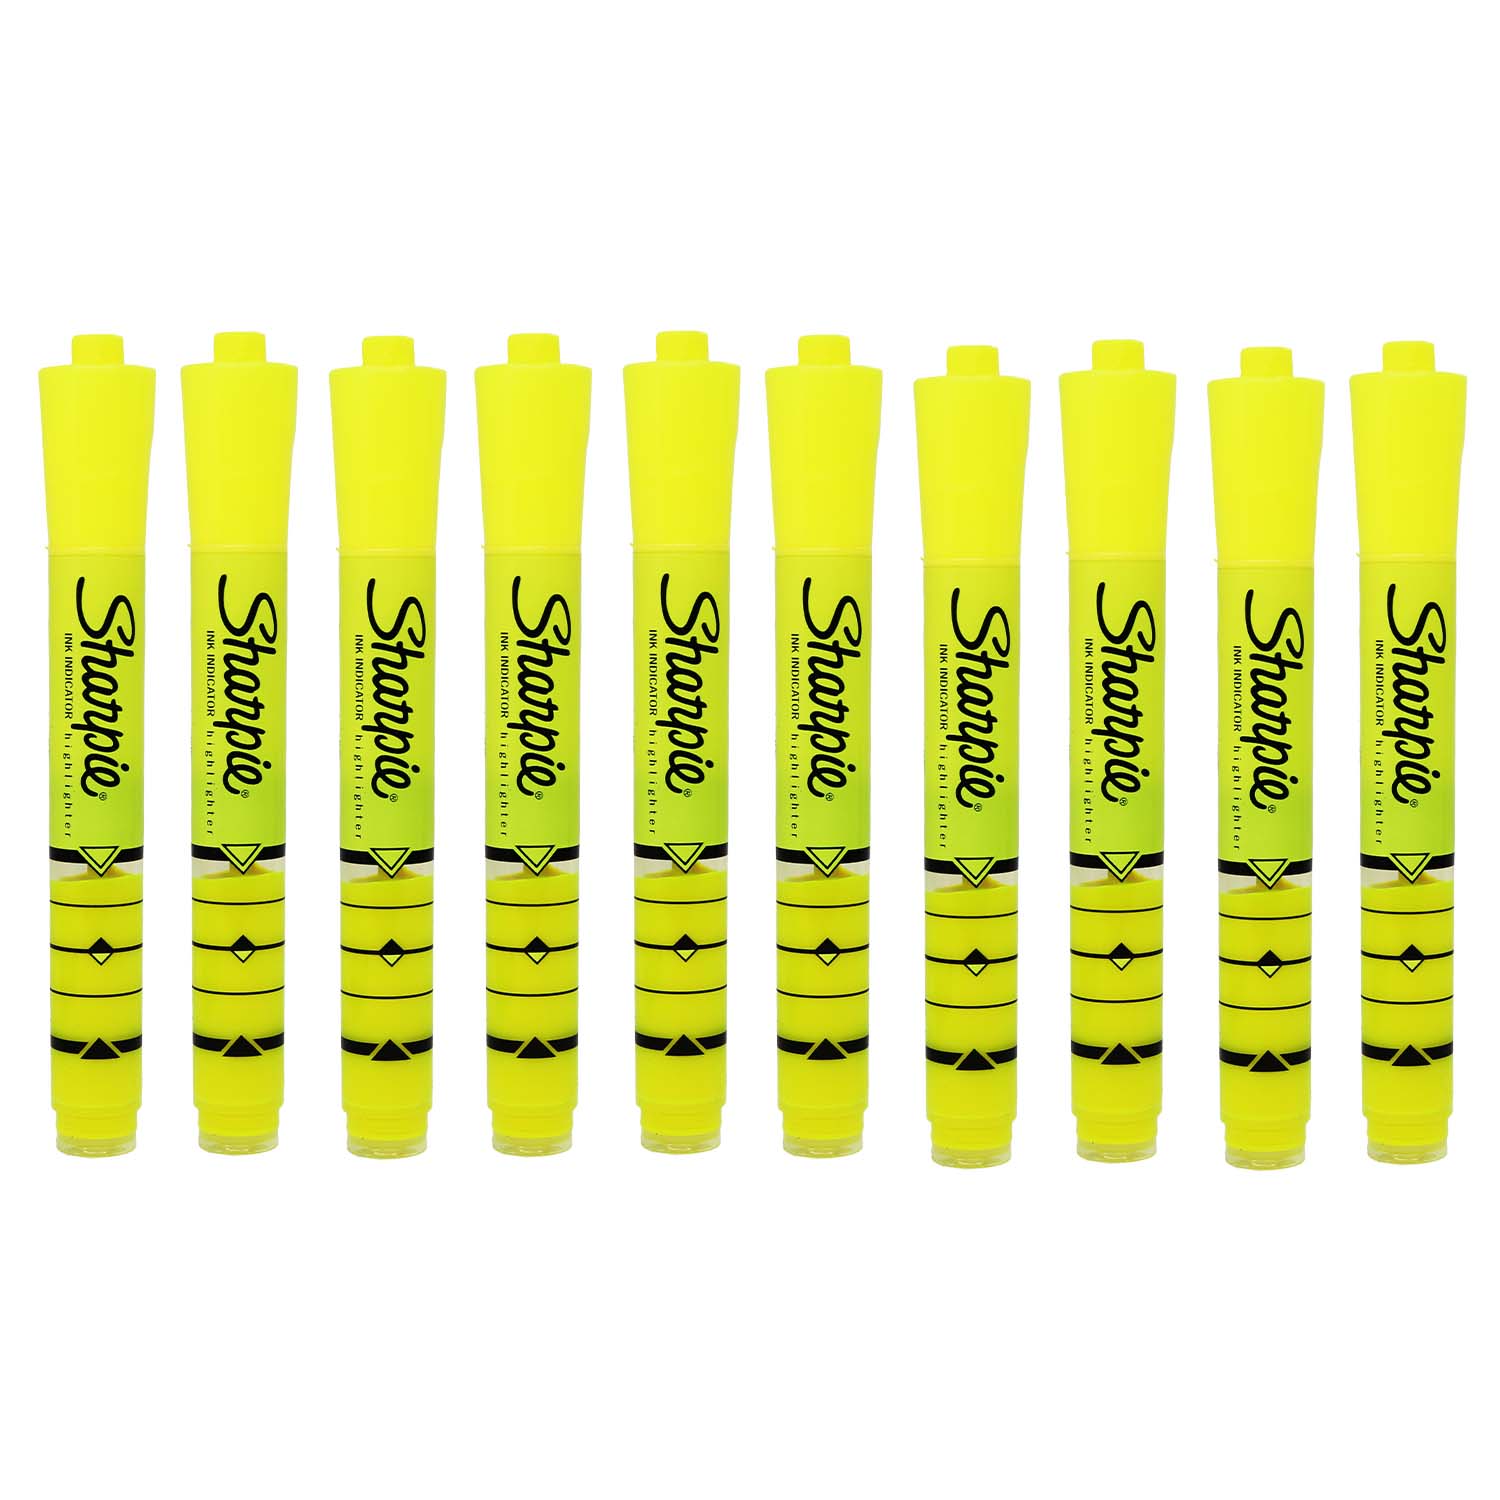 200 Ink Indicator Highlighters in Yellow - Bulk School Supplies Wholesale Case of 200 -Ink Indicator Highlighters